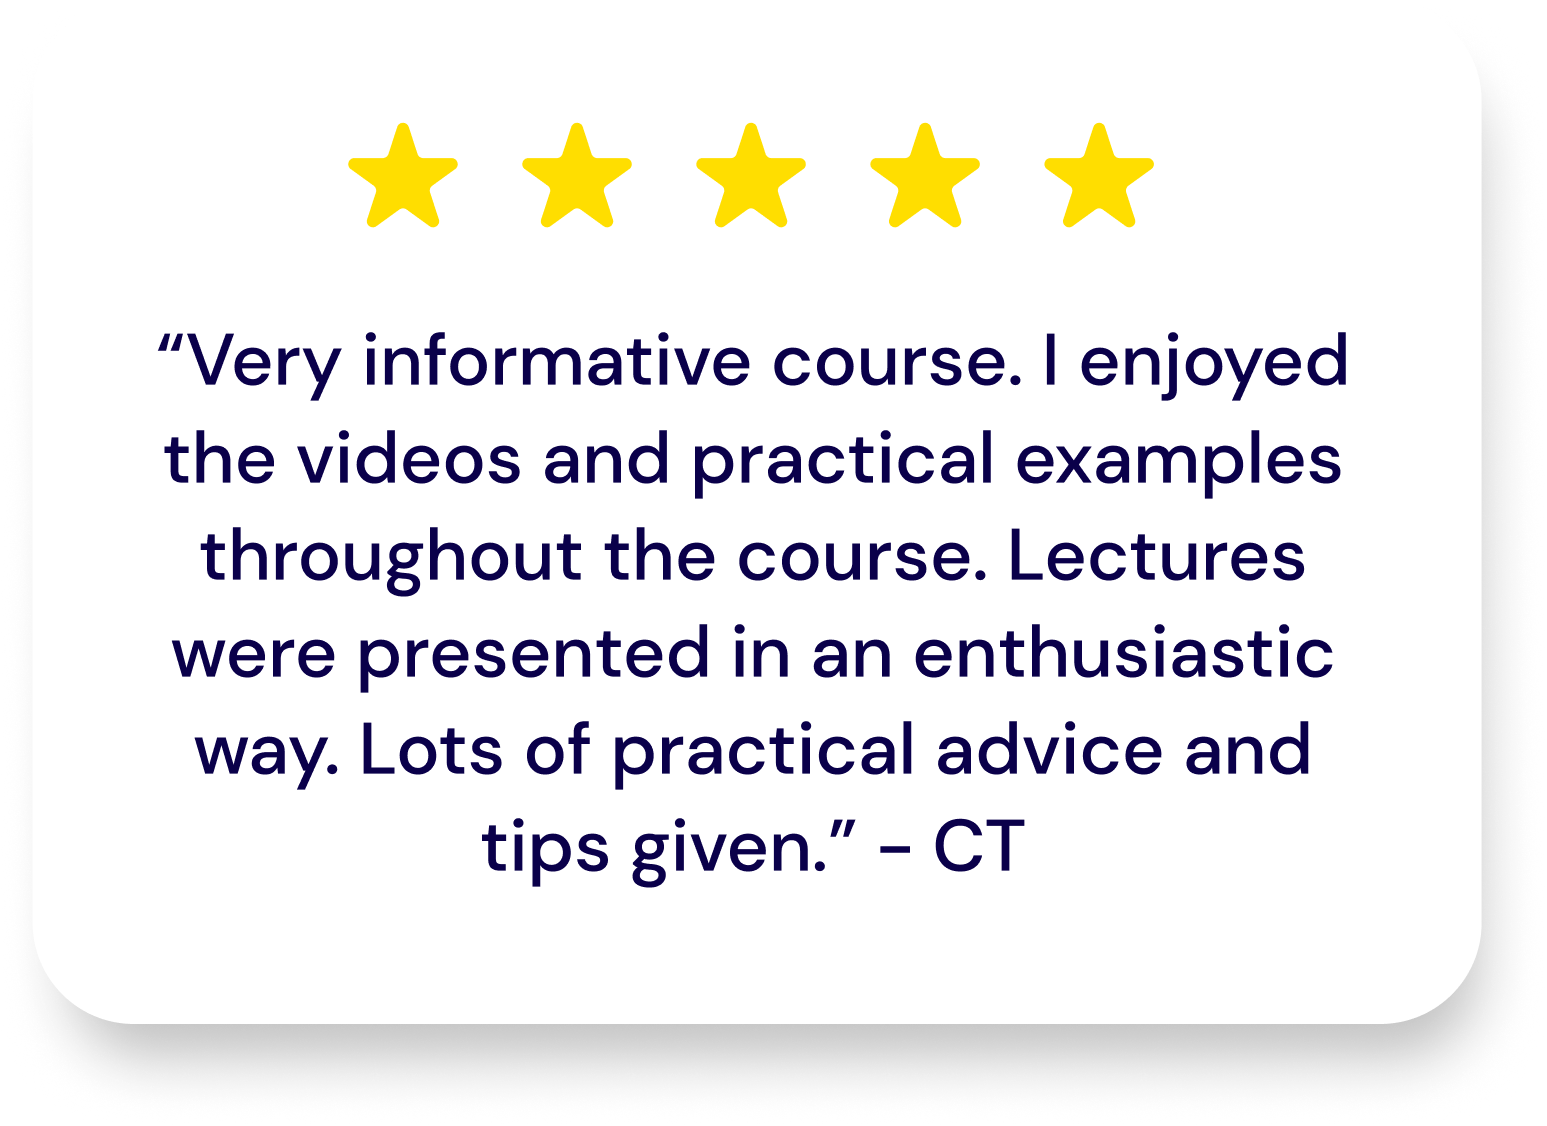 5 star rating from user CT: Very informative course. I enjoyed the videos and practical examples throughout the course. Lectures were presented in an enthusiastic way. Lots of practical advice and tips given. 